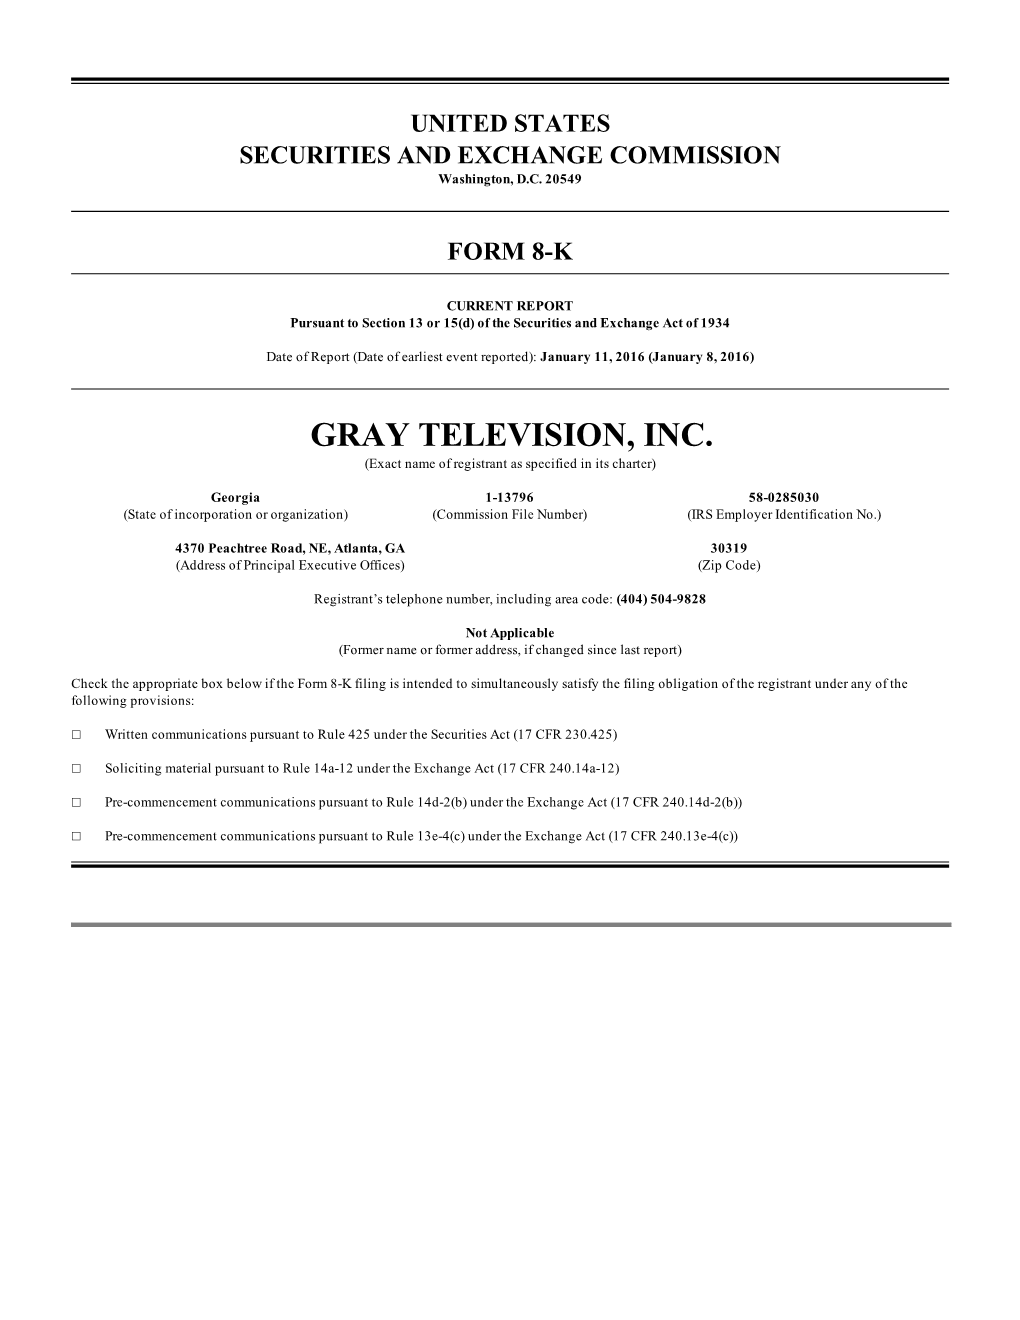 GRAY TELEVISION, INC. (Exact Name of Registrant As Specified in Its Charter)